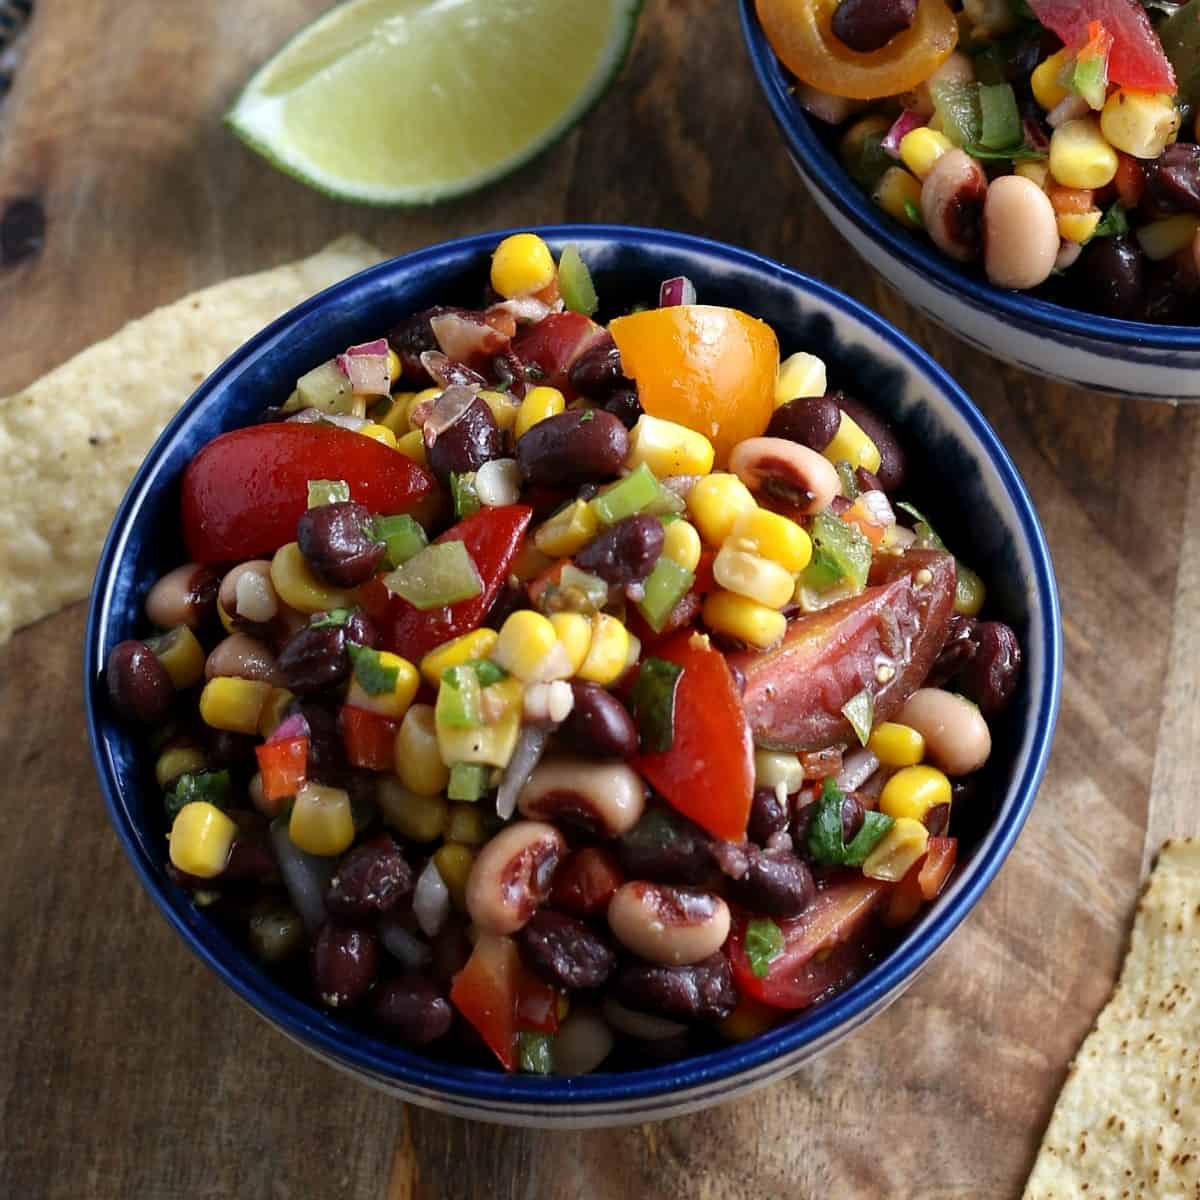 Overhead view of cowboy caviar in a blue bowl showing corn, beans and more veggies all waiting to be dipped with a chip.